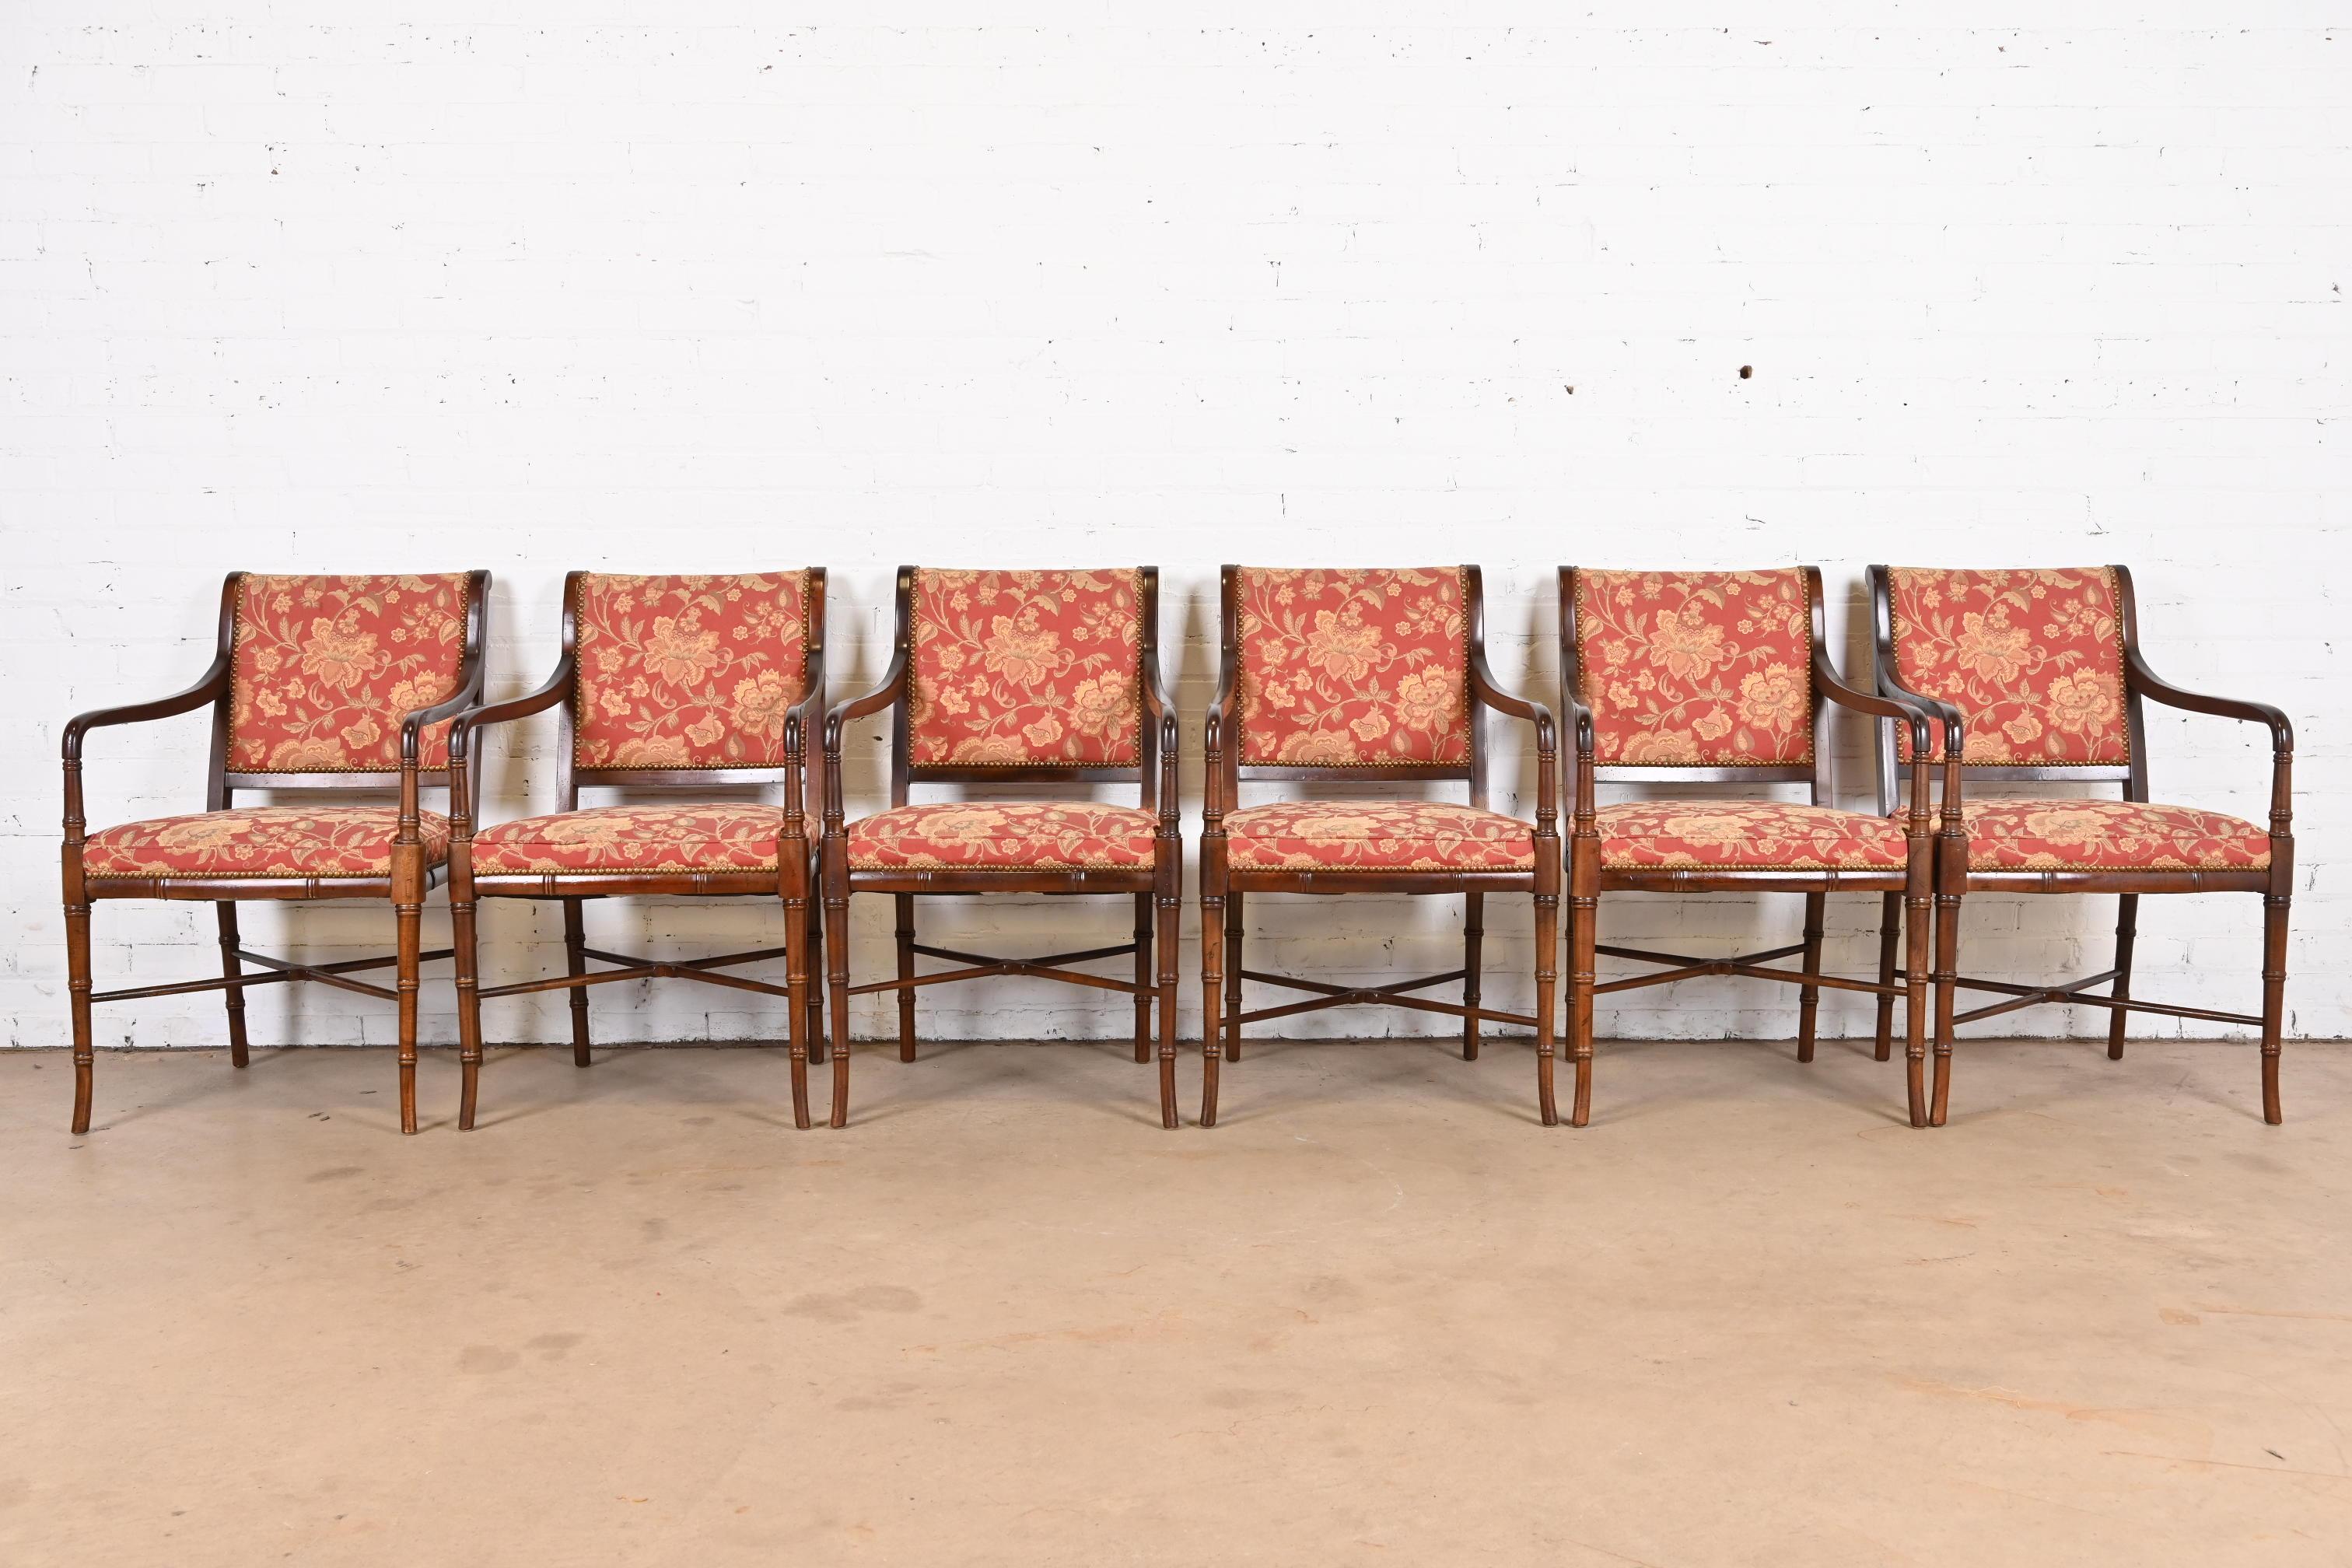 A gorgeous set of six Regency style dining armchairs

In the manner of Baker Furniture

By Southwood

USA, Late 20th Century

Faux bamboo walnut frames, with brass studded upholstered seats and back in a floral patterned fabric.

Measures: 22